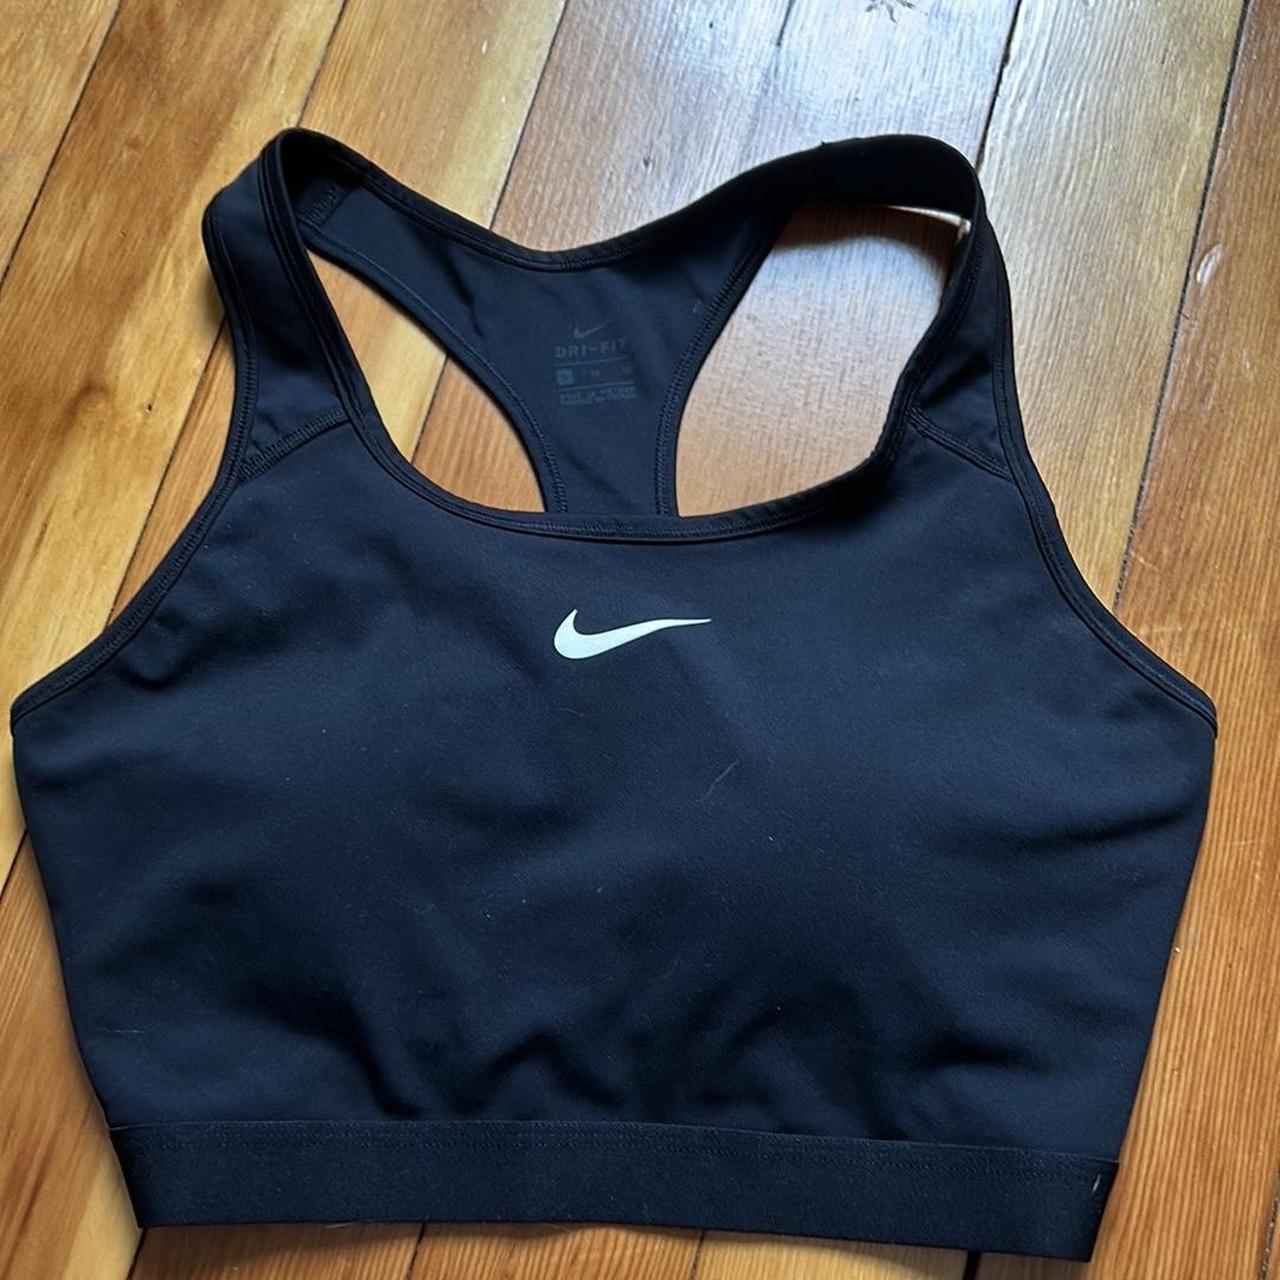 XL Nike bra, great condition, pads included - Depop